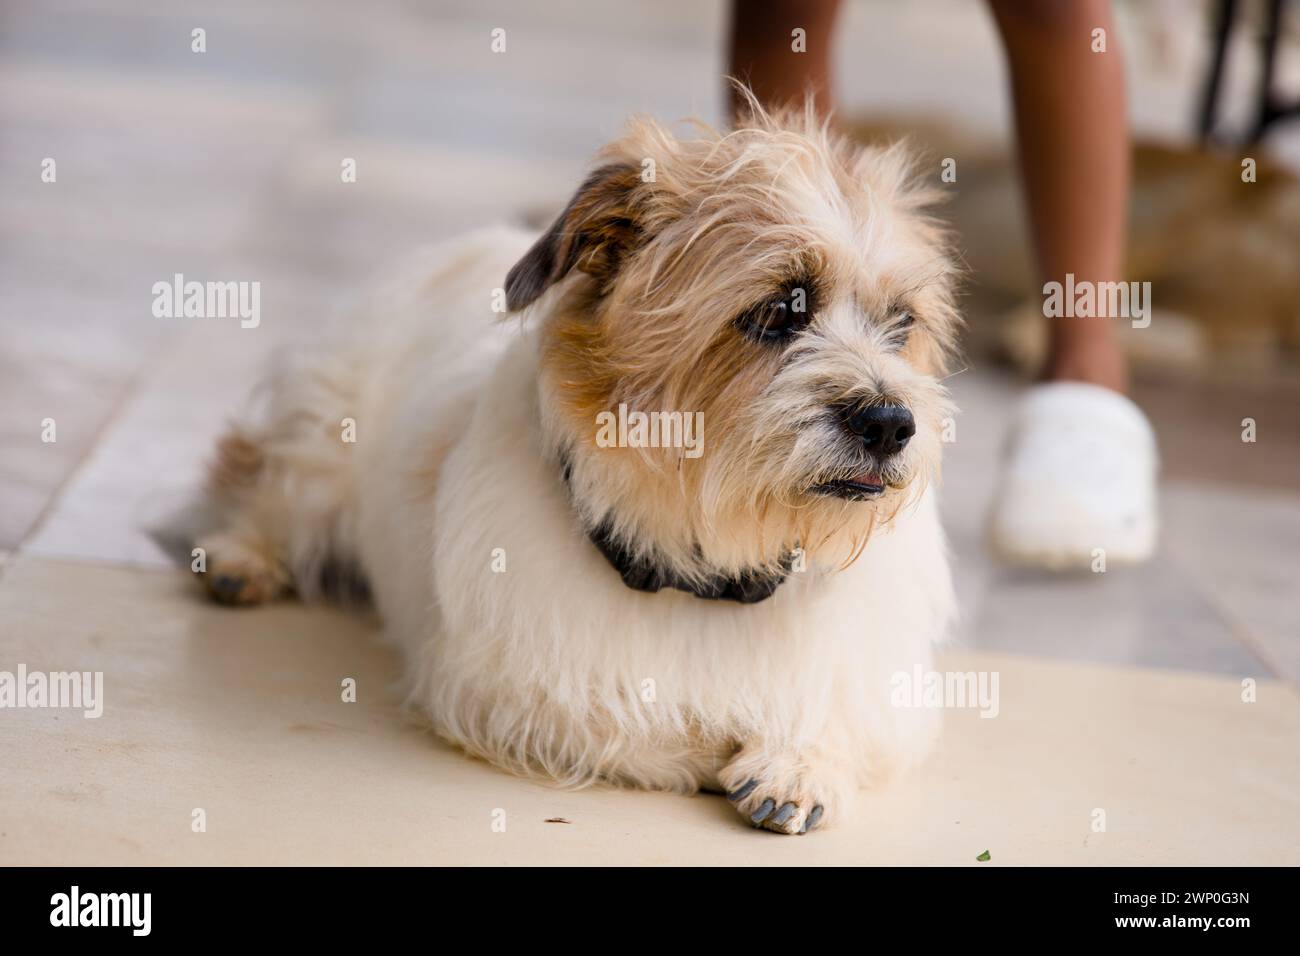 A close-up photo of a charming dog sitting attentively on a light-colored floor Stock Photo